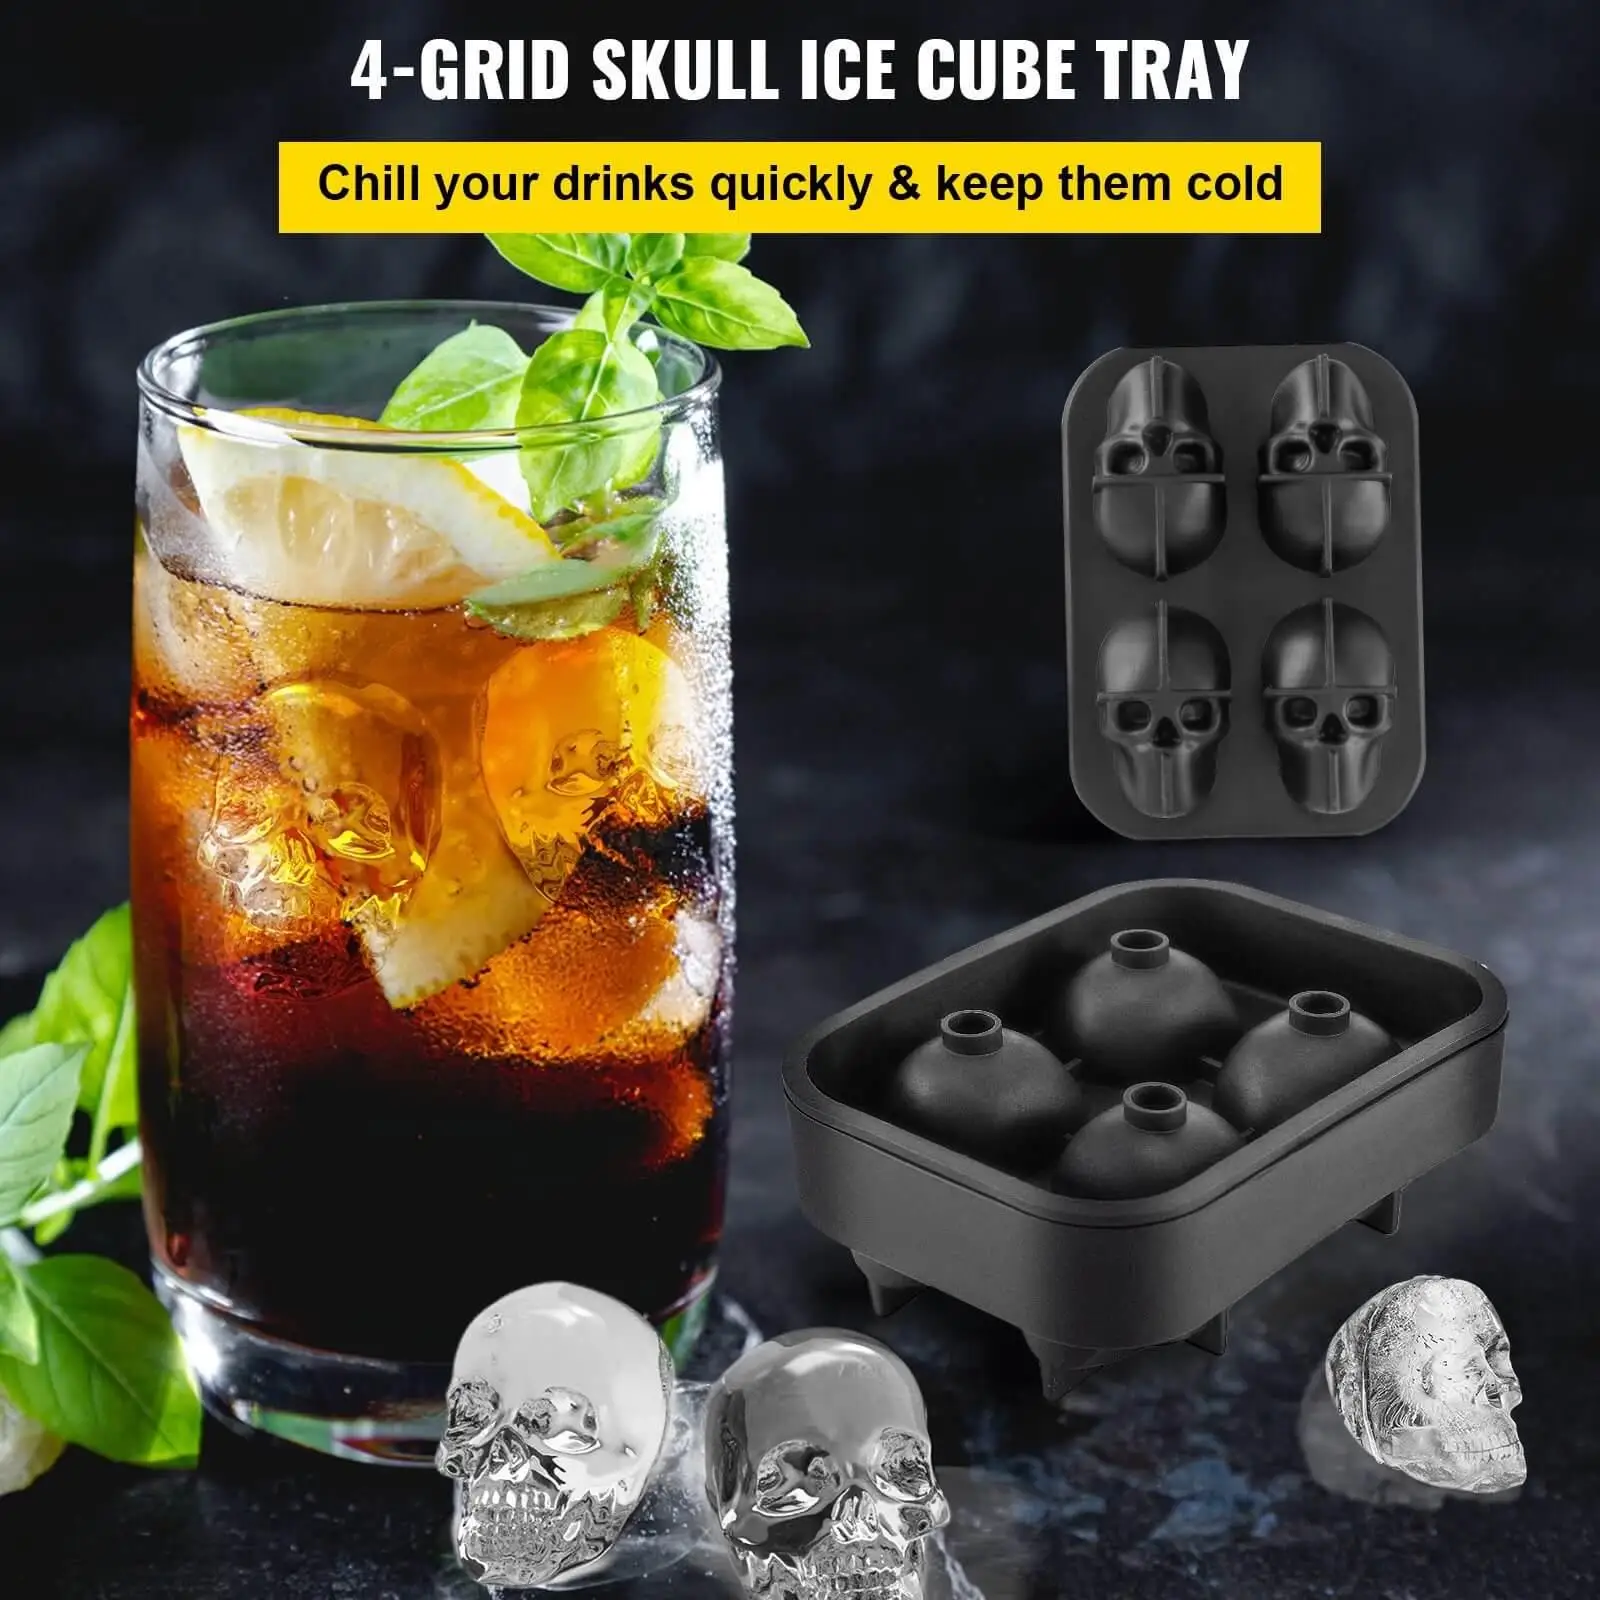 Skull Ice cubes, tray and molds